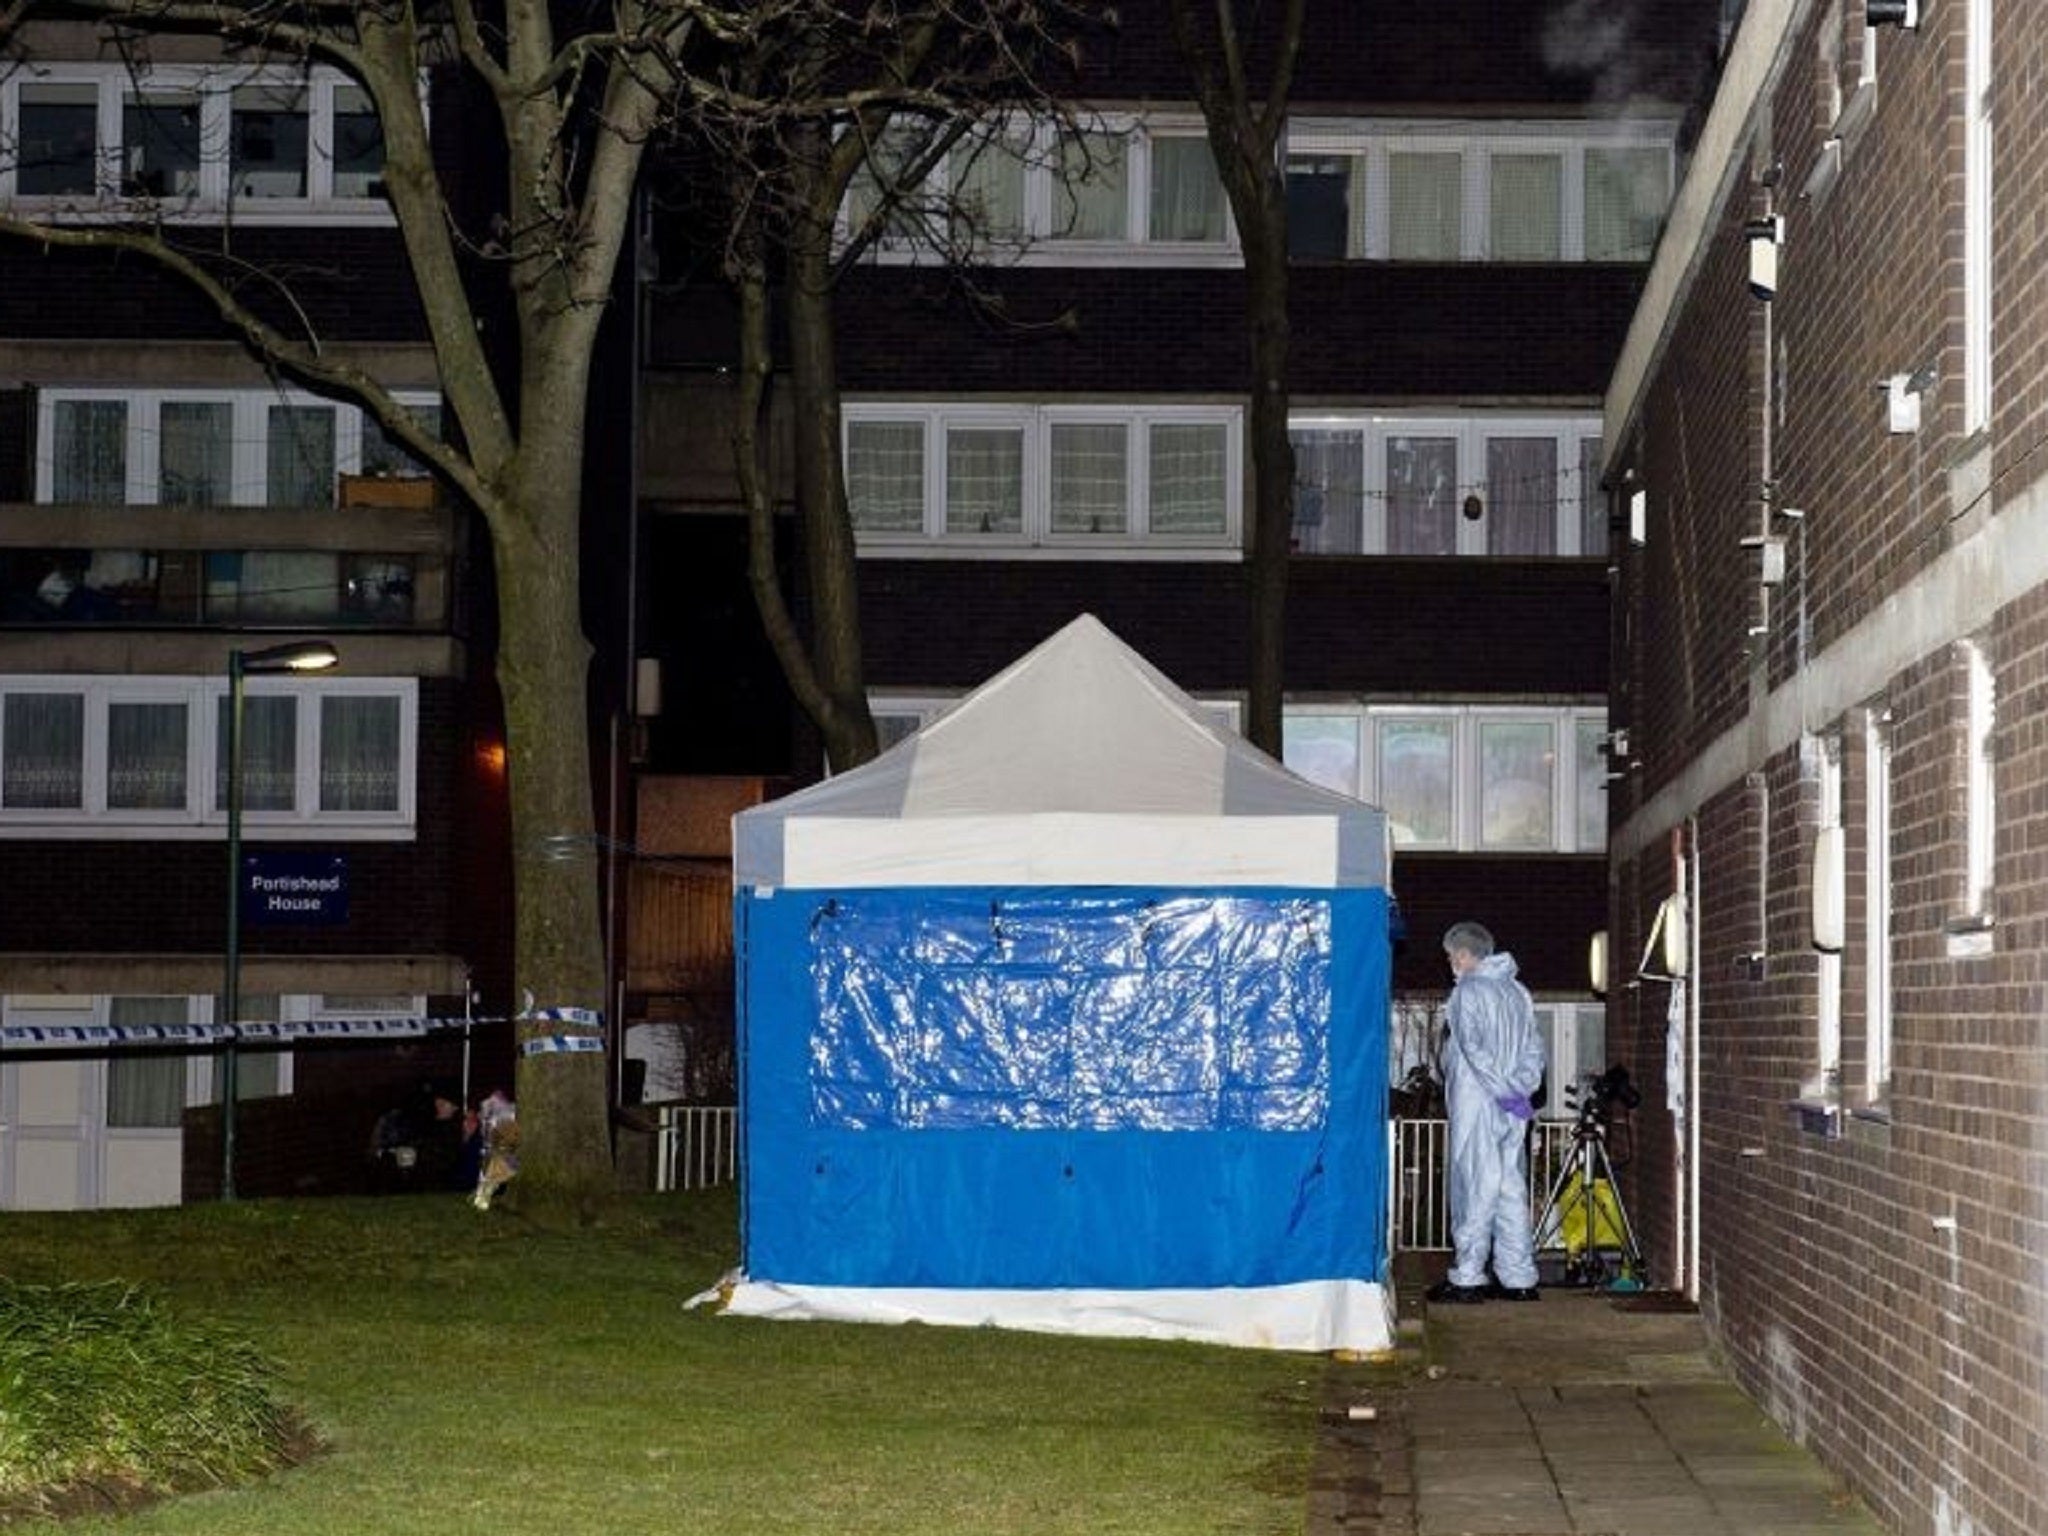 Landor House in Westbourne Park, where a man and his parents were found dead